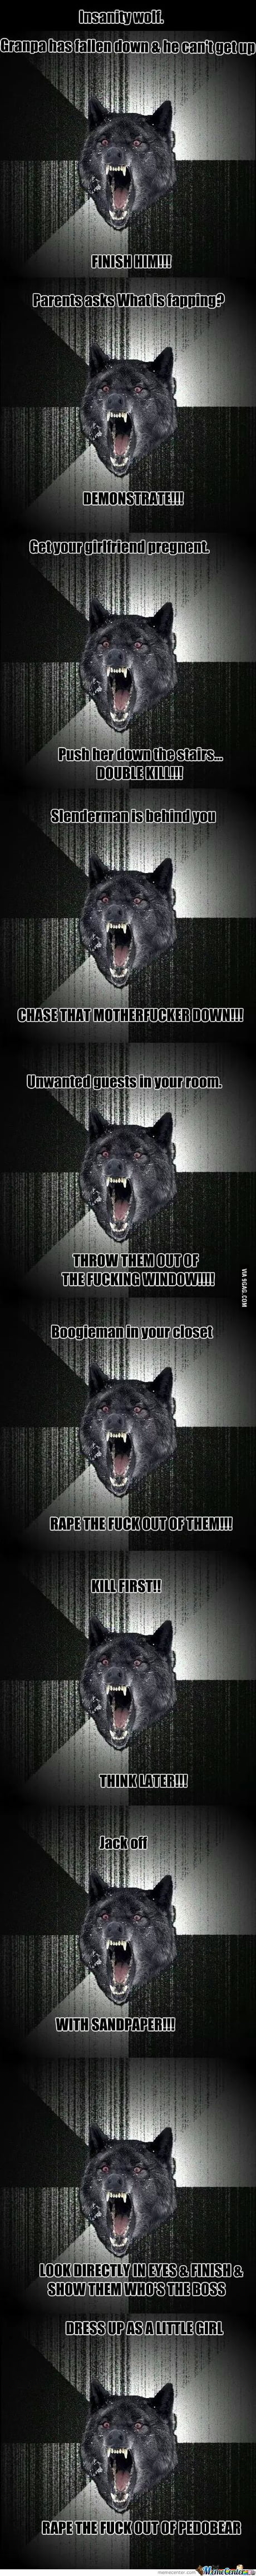 Just little collection of Insanity Wolf memes. - 9GAG